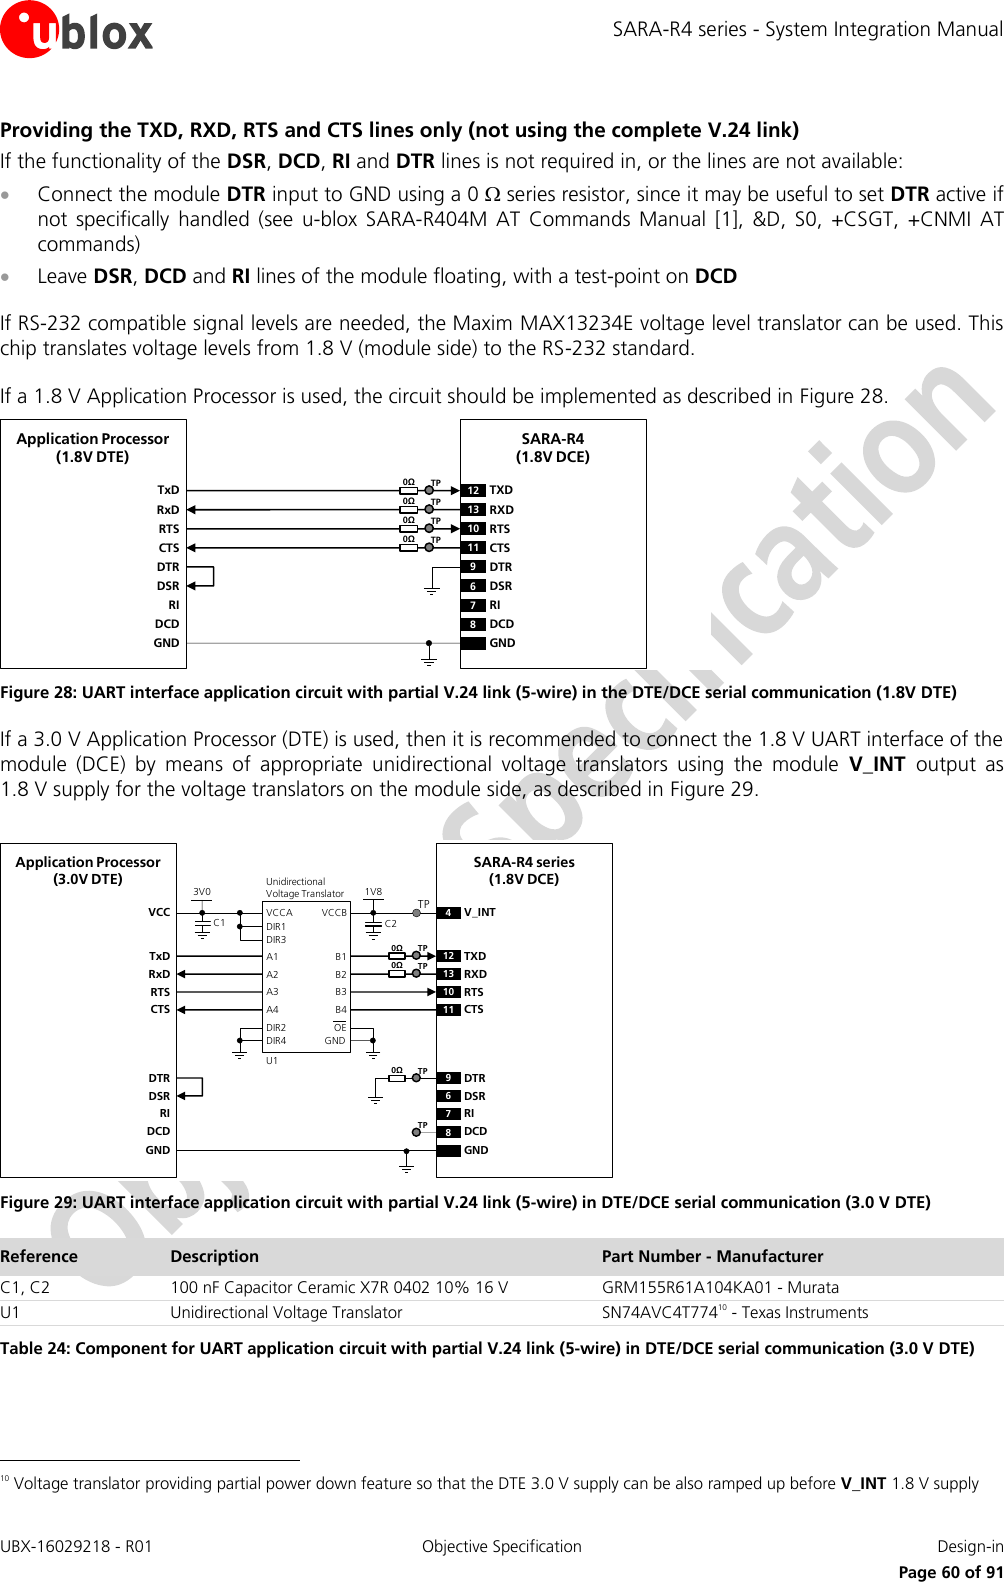 SARA-R4 series - System Integration Manual UBX-16029218 - R01  Objective Specification  Design-in     Page 60 of 91 Providing the TXD, RXD, RTS and CTS lines only (not using the complete V.24 link) If the functionality of the DSR, DCD, RI and DTR lines is not required in, or the lines are not available:  Connect the module DTR input to GND using a 0  series resistor, since it may be useful to set DTR active if not  specifically  handled  (see  u-blox  SARA-R404M  AT  Commands  Manual [1],  &amp;D,  S0,  +CSGT,  +CNMI  AT commands)  Leave DSR, DCD and RI lines of the module floating, with a test-point on DCD  If RS-232 compatible signal levels are needed, the Maxim MAX13234E voltage level translator can be used. This chip translates voltage levels from 1.8 V (module side) to the RS-232 standard.  If a 1.8 V Application Processor is used, the circuit should be implemented as described in Figure 28.  TxDApplication Processor(1.8V DTE)RxDRTSCTSDTRDSRRIDCDGNDSARA-R4(1.8V DCE)12 TXD9DTR13 RXD10 RTS11 CTS6DSR7RI8DCDGND0ΩTP0ΩTP0ΩTP0ΩTP Figure 28: UART interface application circuit with partial V.24 link (5-wire) in the DTE/DCE serial communication (1.8V DTE) If a 3.0 V Application Processor (DTE) is used, then it is recommended to connect the 1.8 V UART interface of the module  (DCE)  by  means  of  appropriate  unidirectional  voltage  translators  using  the  module  V_INT  output  as 1.8 V supply for the voltage translators on the module side, as described in Figure 29.  4V_INTTxDApplication Processor(3.0V DTE)RxDRTSCTSDTRDSRRIDCDGNDSARA-R4 series (1.8V DCE)12 TXD9DTR13 RXD10 RTS11 CTS6DSR7RI8DCDGND1V8B1 A1GNDU1B3A3VCCBVCCAUnidirectionalVoltage TranslatorC1 C23V0DIR3DIR2 OEDIR1VCCB2 A2B4A4DIR4TP0ΩTP0ΩTP0ΩTPTP Figure 29: UART interface application circuit with partial V.24 link (5-wire) in DTE/DCE serial communication (3.0 V DTE) Reference Description Part Number - Manufacturer C1, C2 100 nF Capacitor Ceramic X7R 0402 10% 16 V GRM155R61A104KA01 - Murata U1 Unidirectional Voltage Translator SN74AVC4T77410 - Texas Instruments Table 24: Component for UART application circuit with partial V.24 link (5-wire) in DTE/DCE serial communication (3.0 V DTE)                                                        10 Voltage translator providing partial power down feature so that the DTE 3.0 V supply can be also ramped up before V_INT 1.8 V supply 